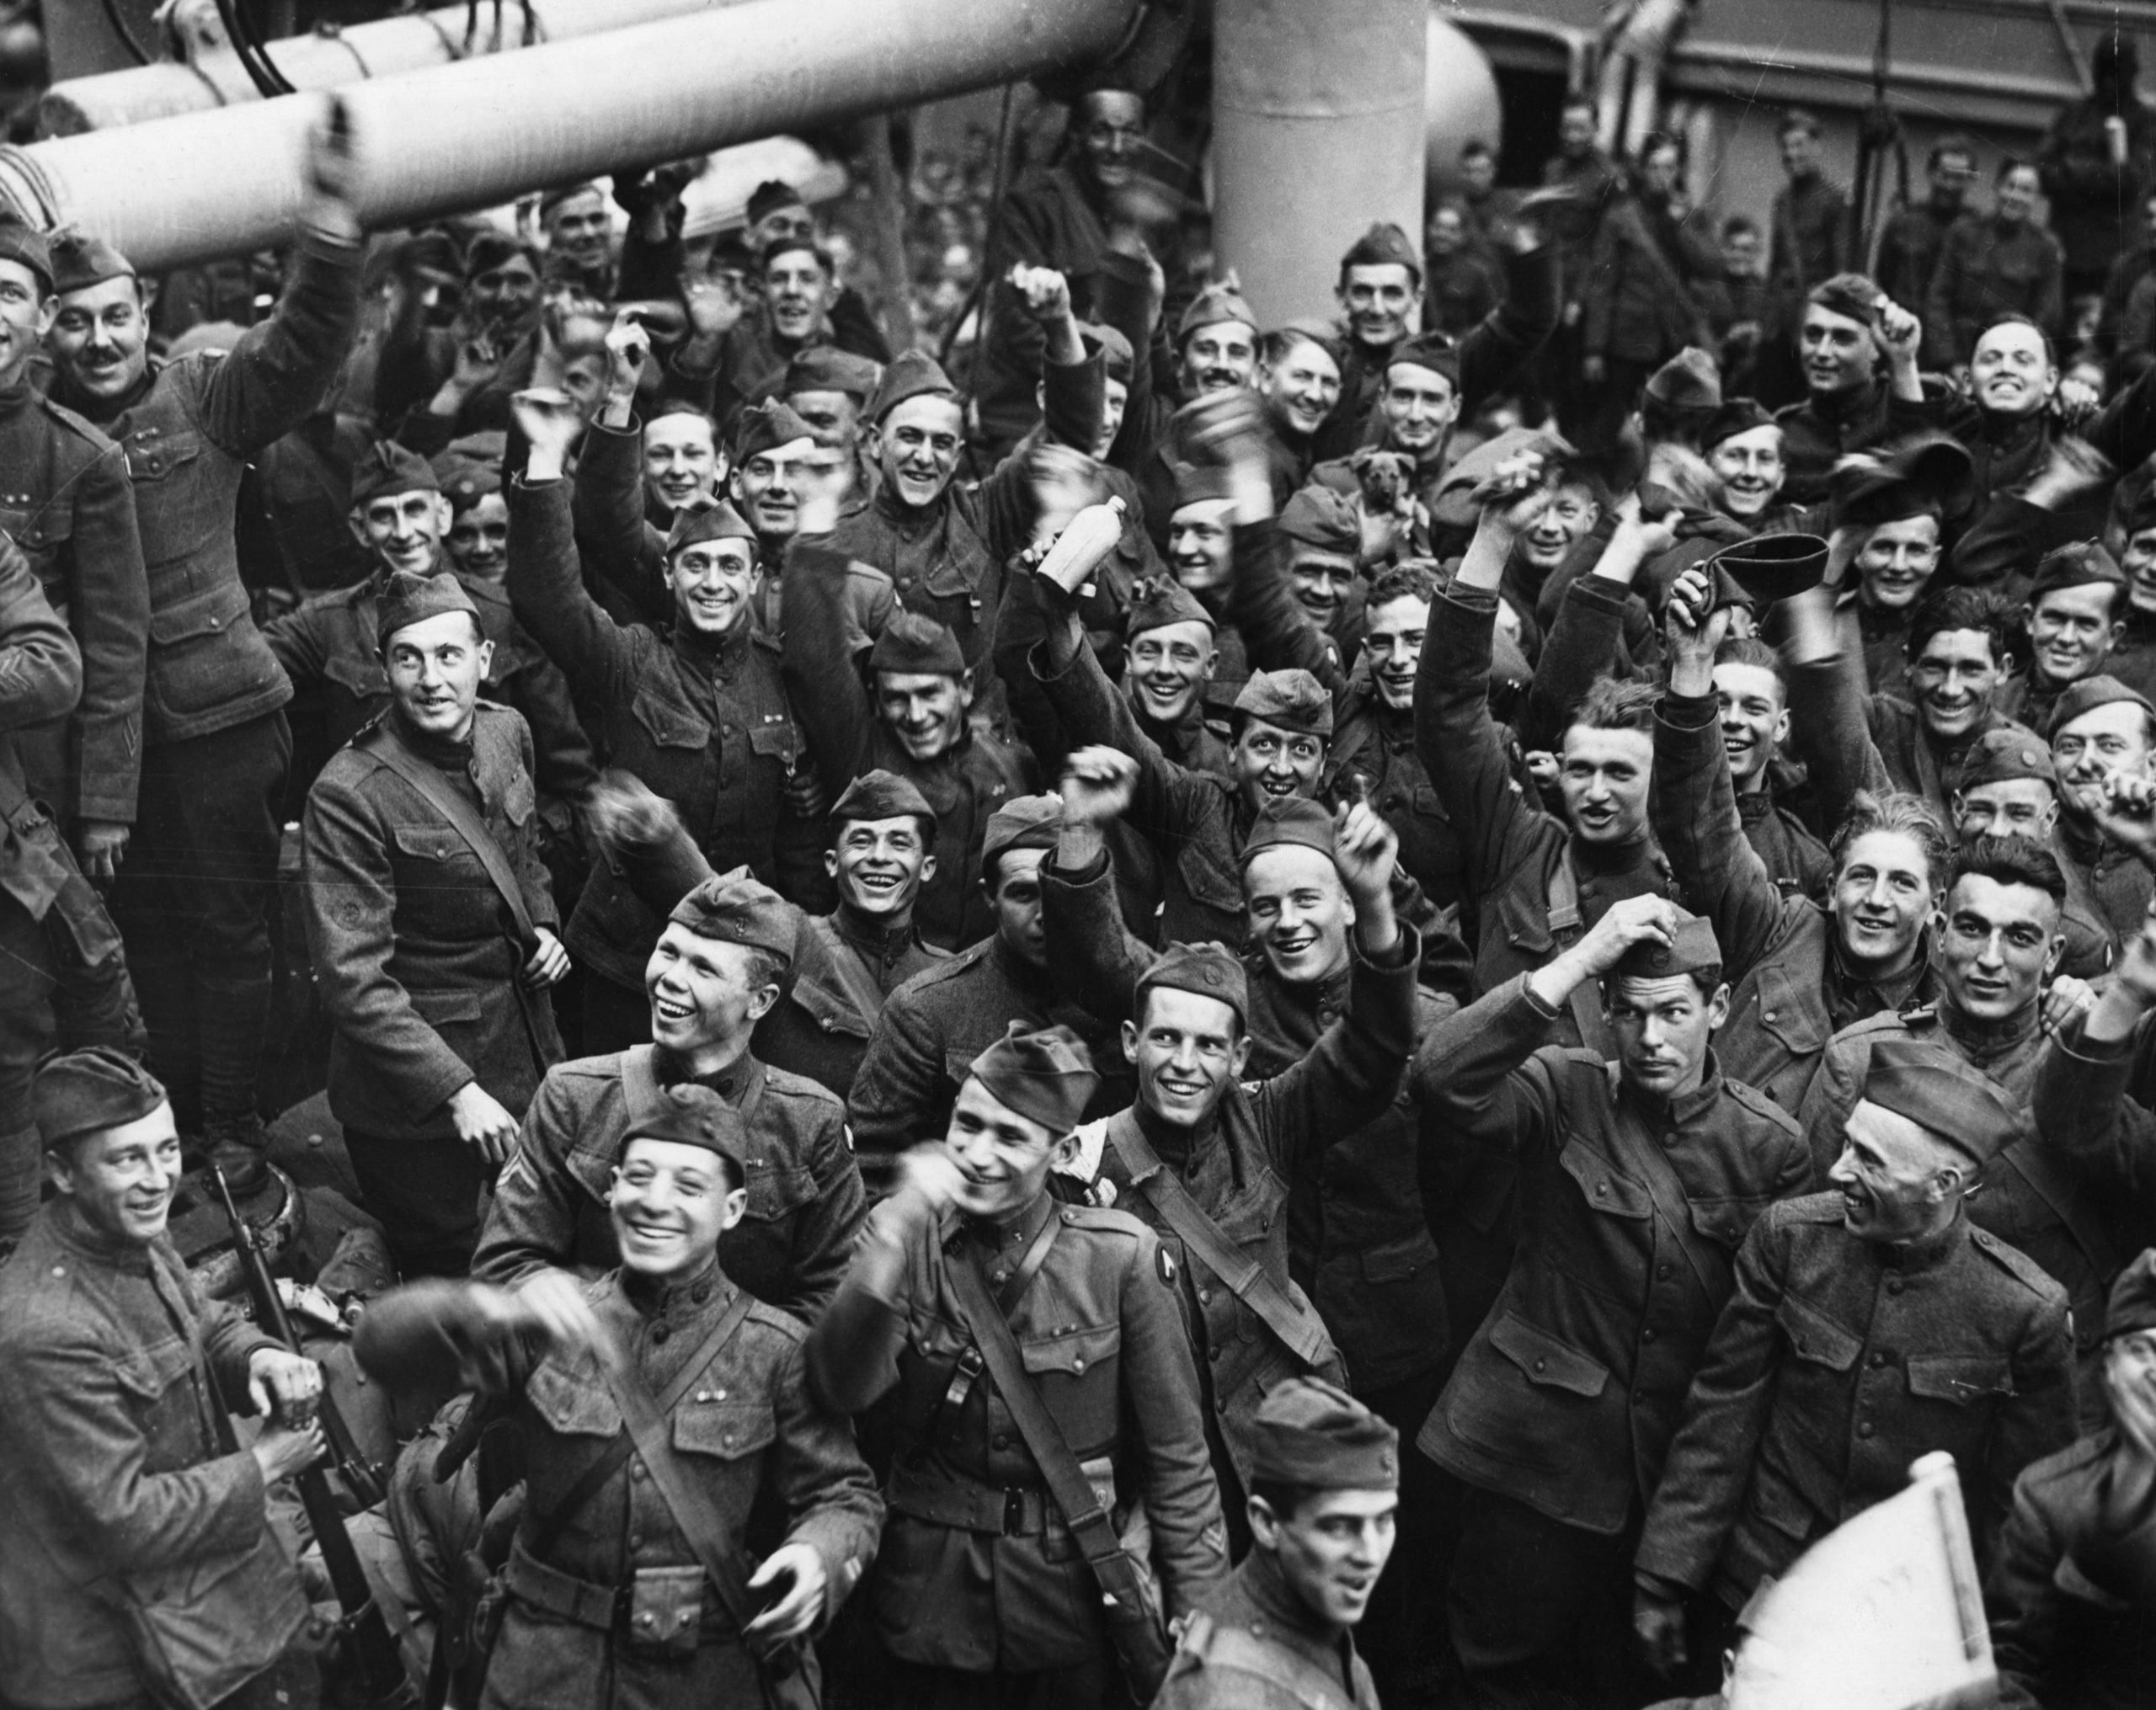 From Armistice Day to Veterans Day: How History Has Led us to Honor All Heroes of Our Nation